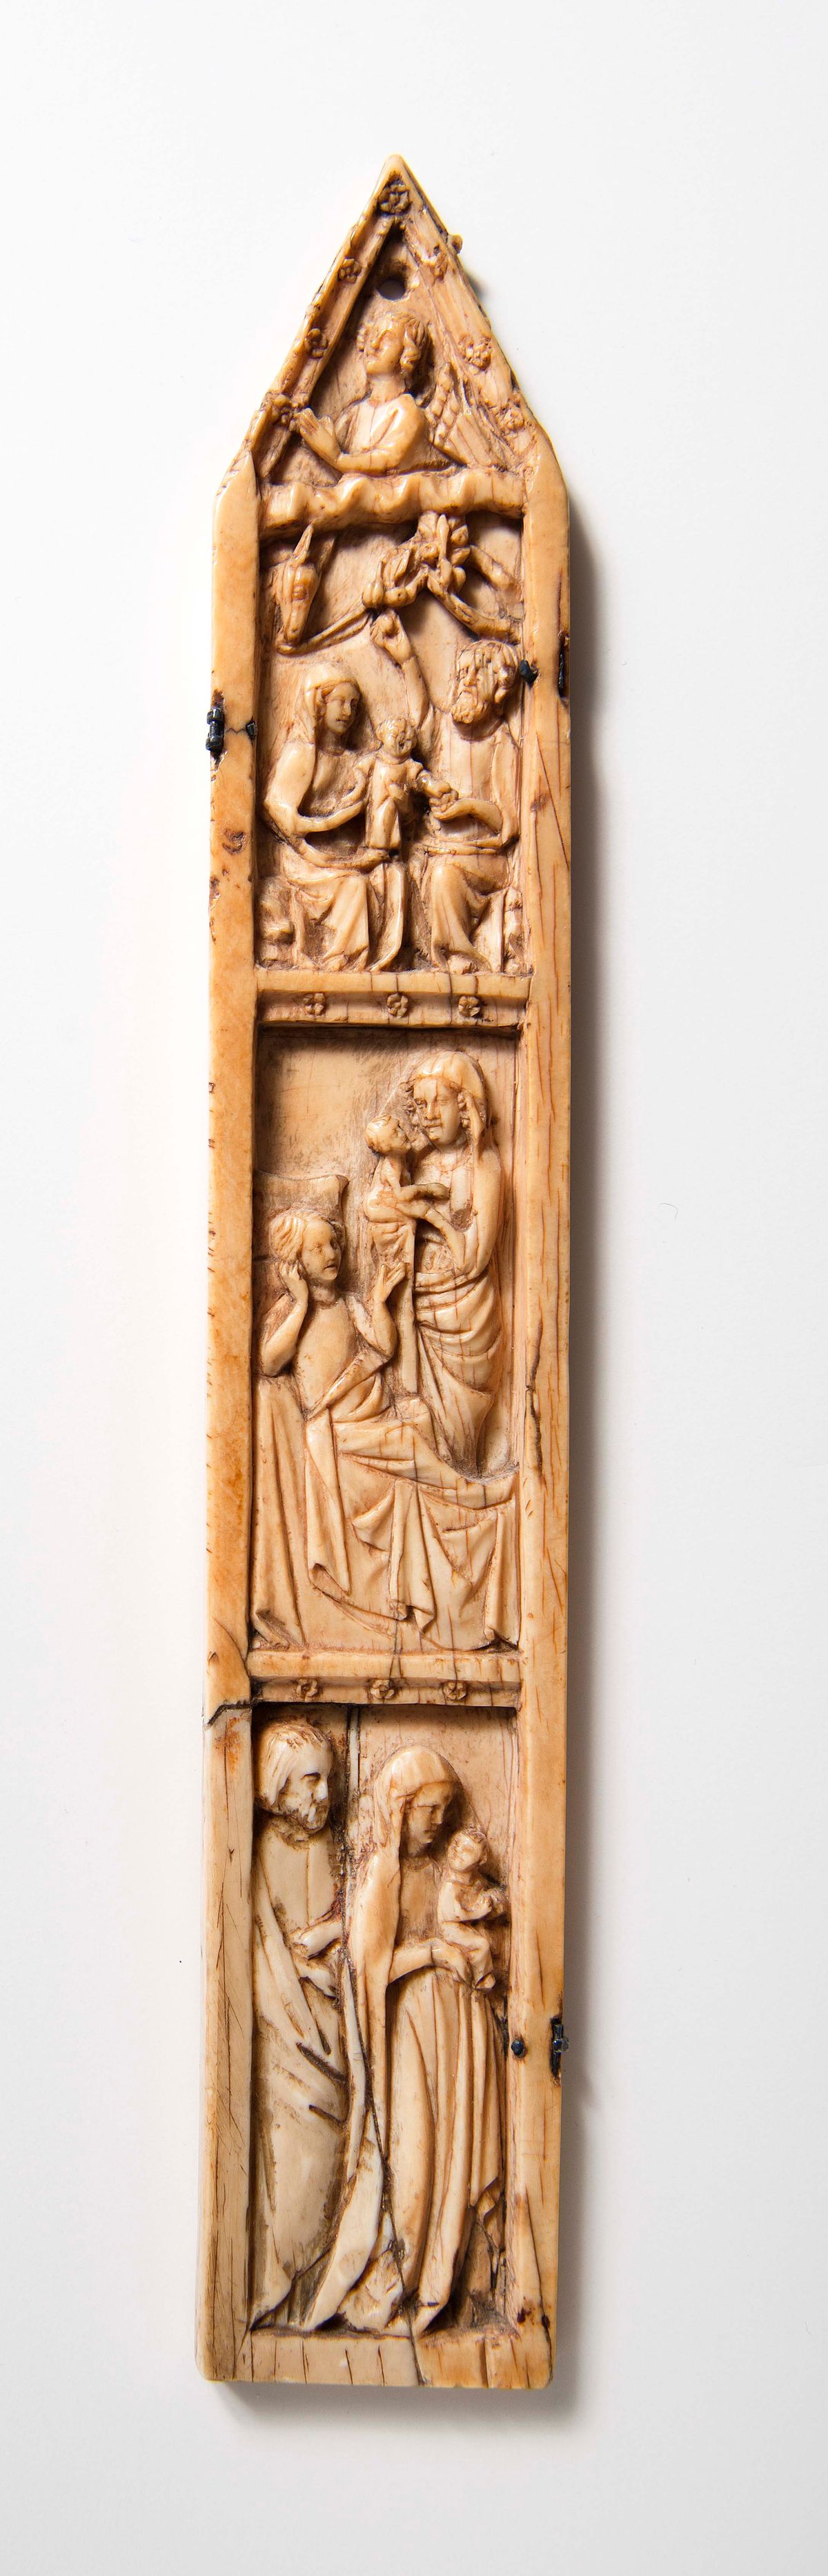 Shutter of a Tabernacle with Scenes of the Infancy of Christ (1300, France) - Catholic Stock Photo